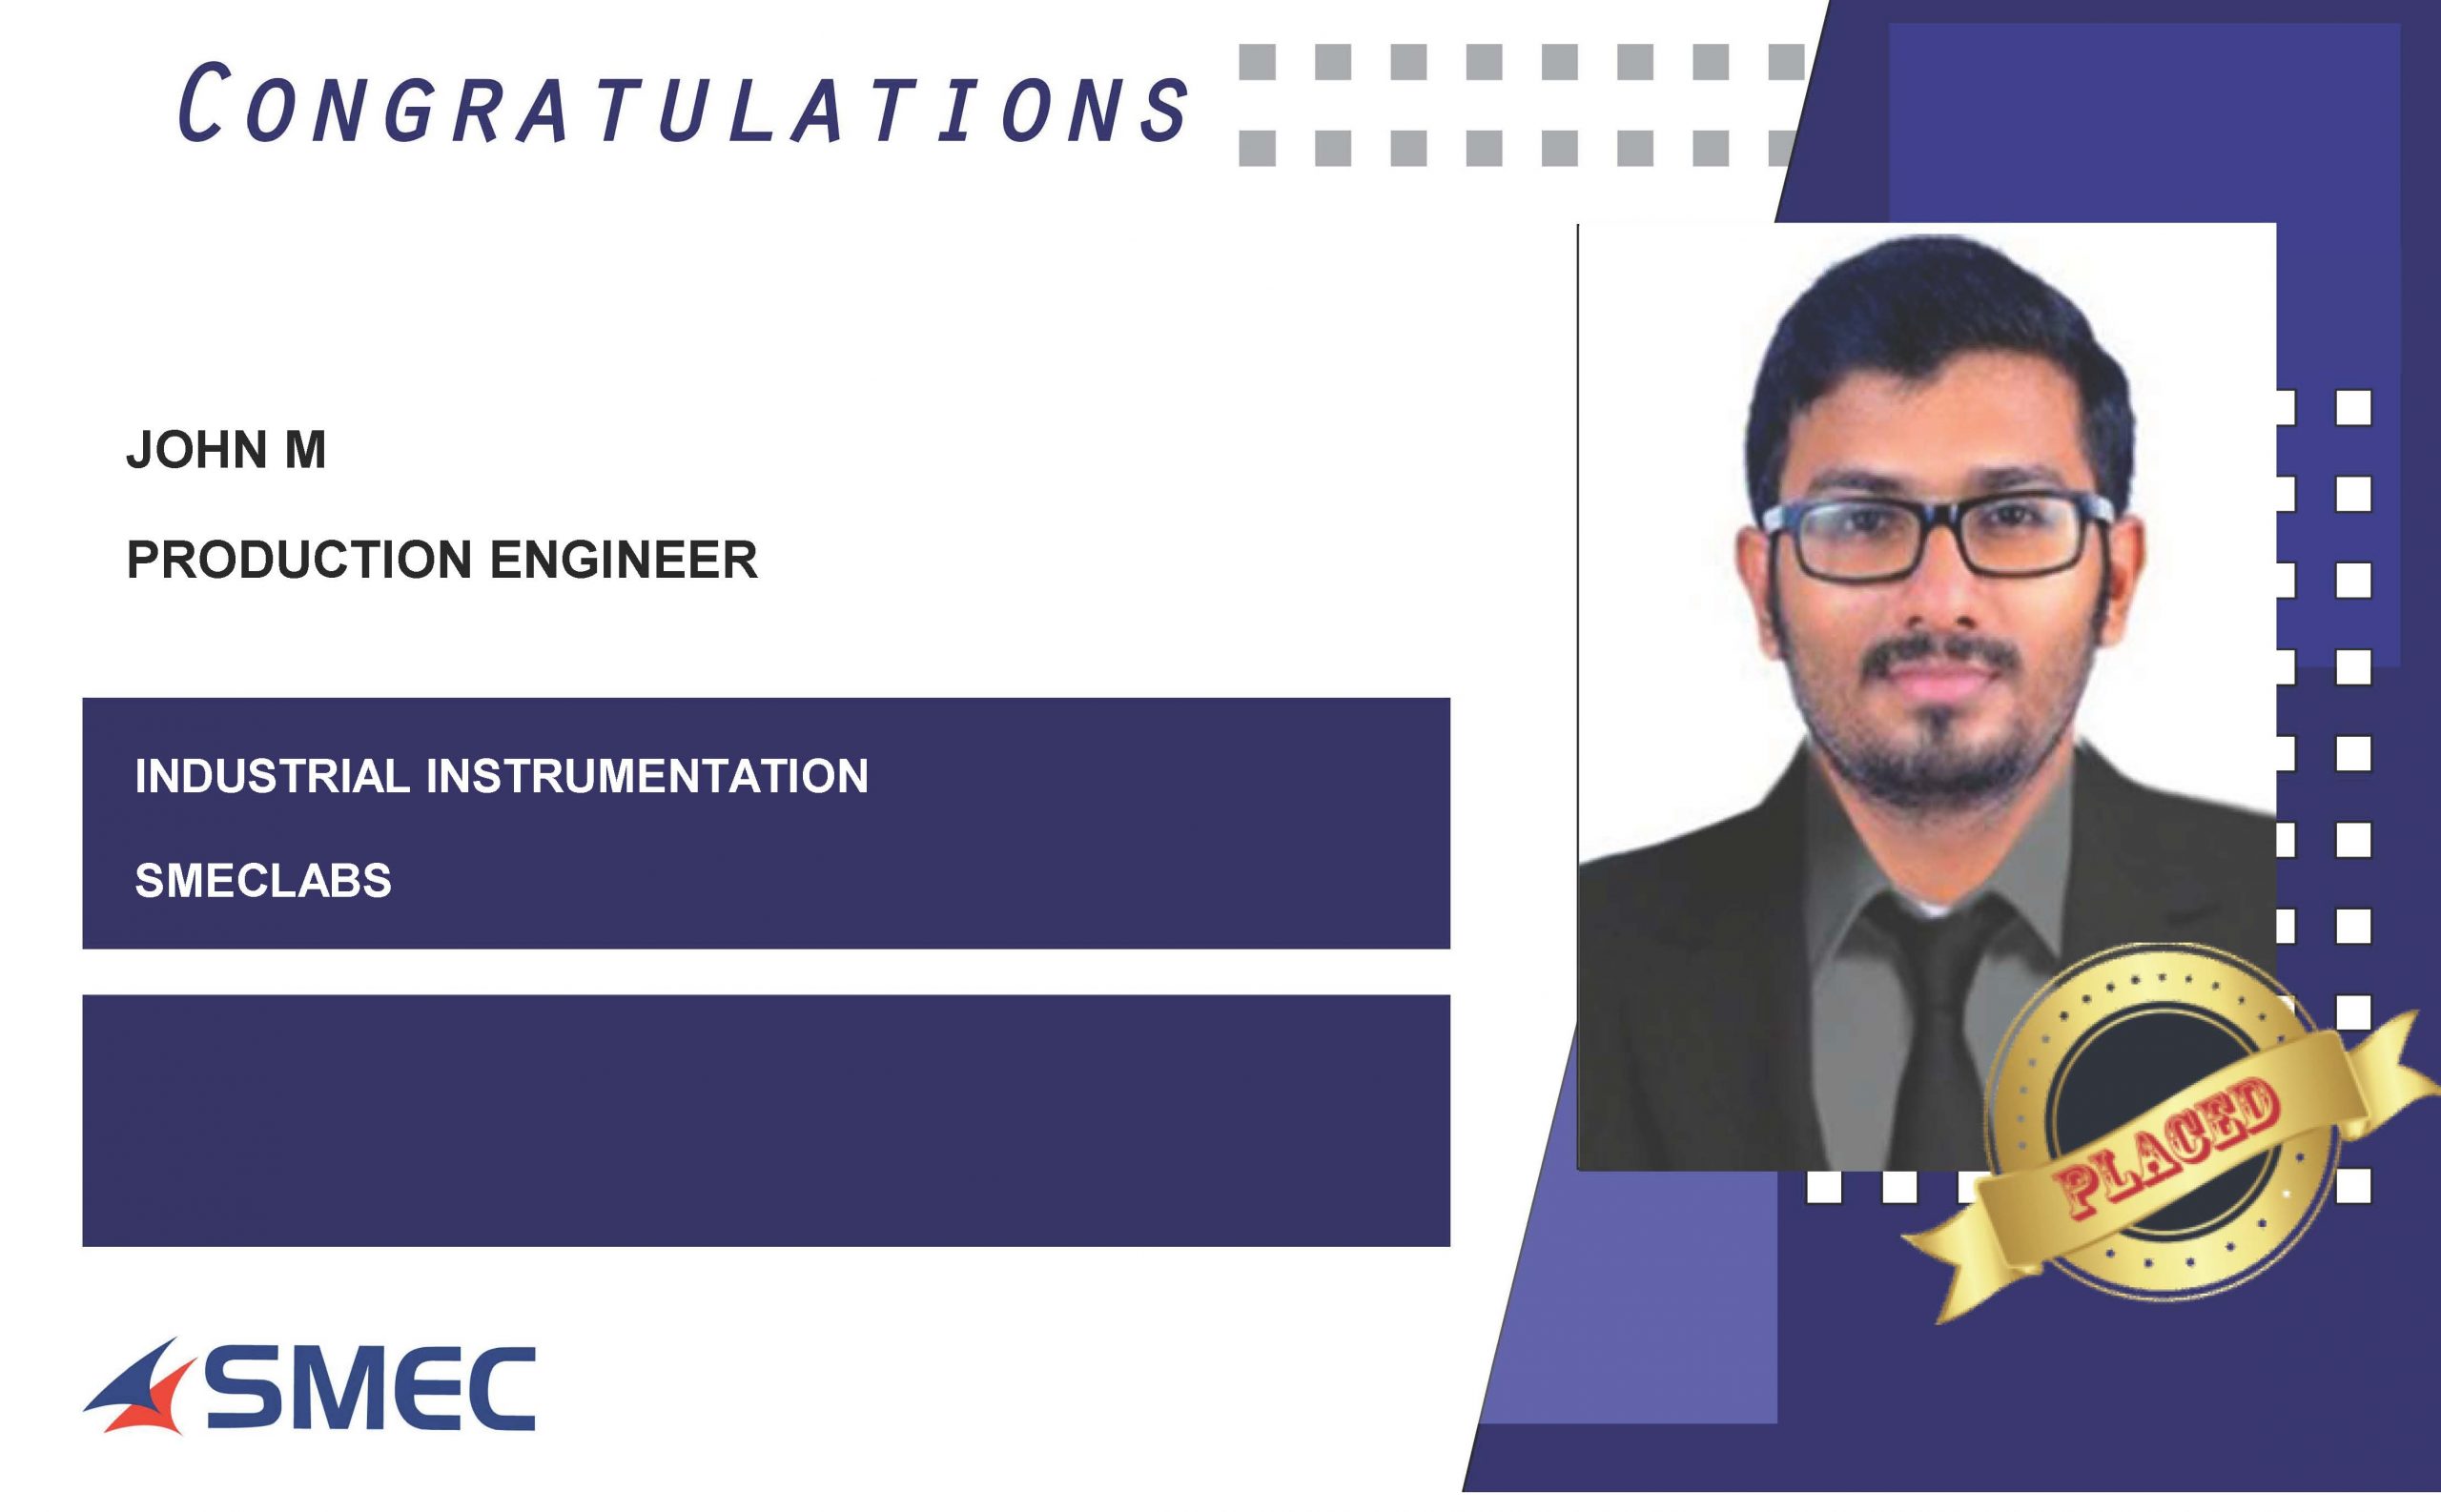 John M Successfully placed as Production Engineer